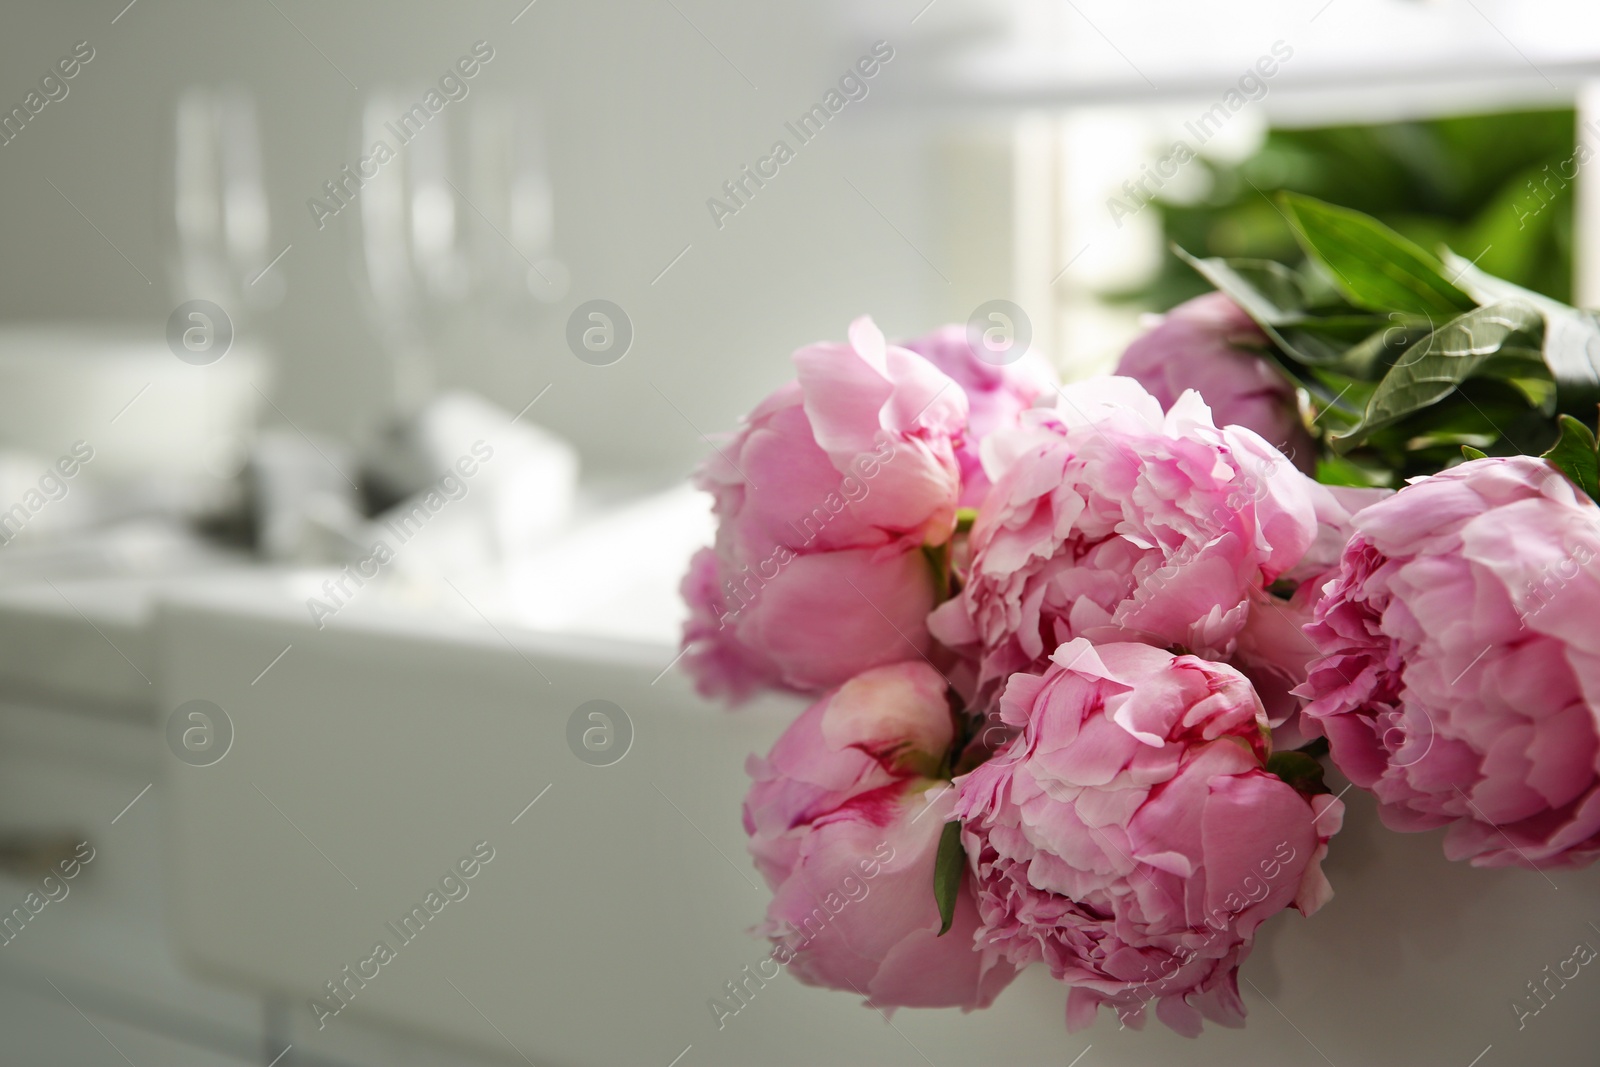 Photo of Bouquet of beautiful pink peonies on counter in kitchen. Space for text